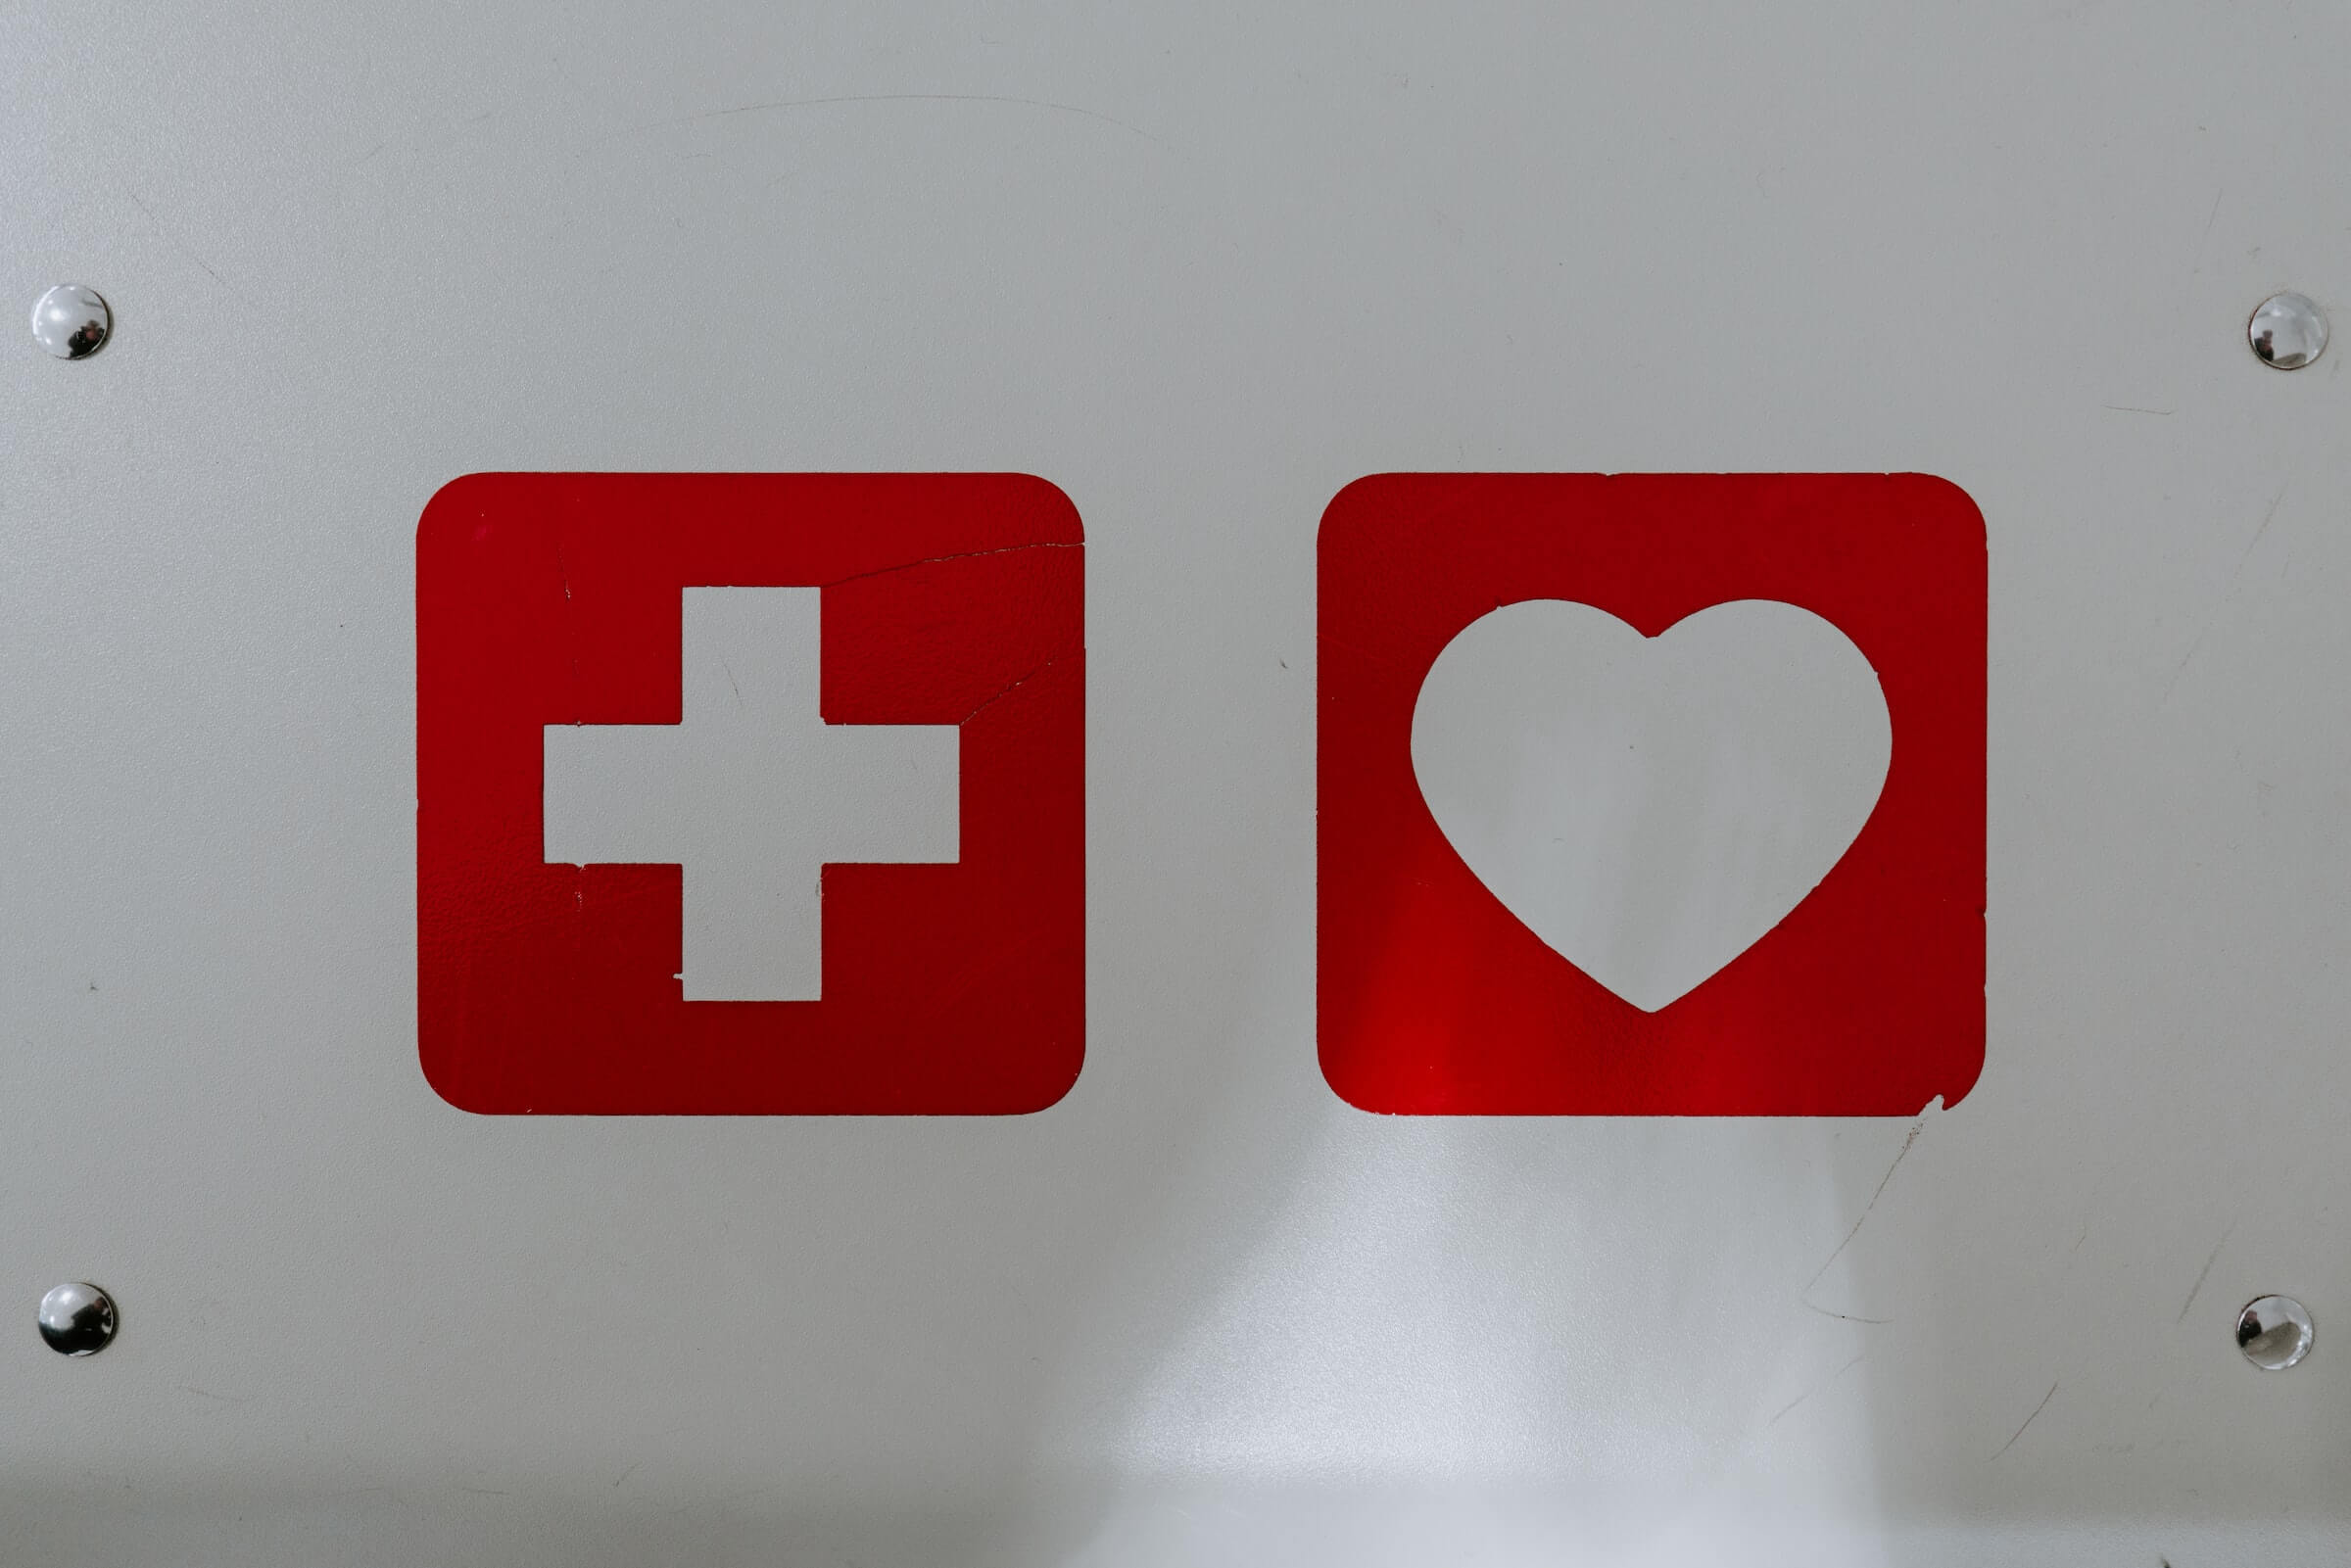 White Cross in Red Square and White Heart in Red Square Next to Each Other on White Background